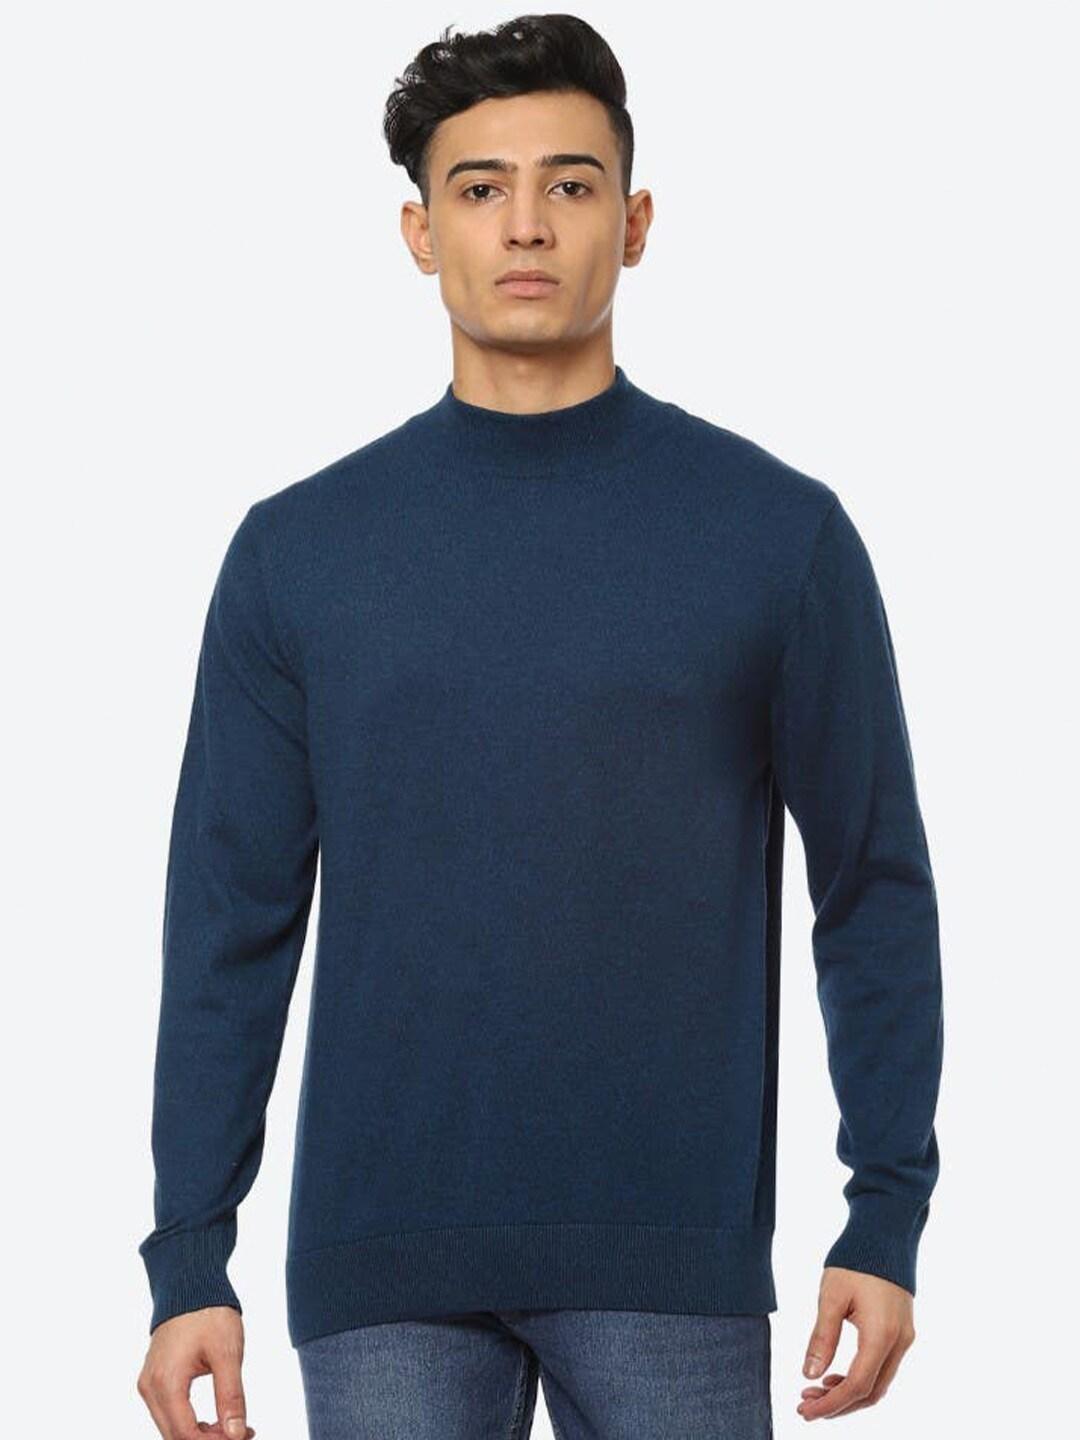 2bme high neck long sleeves cotton pullover